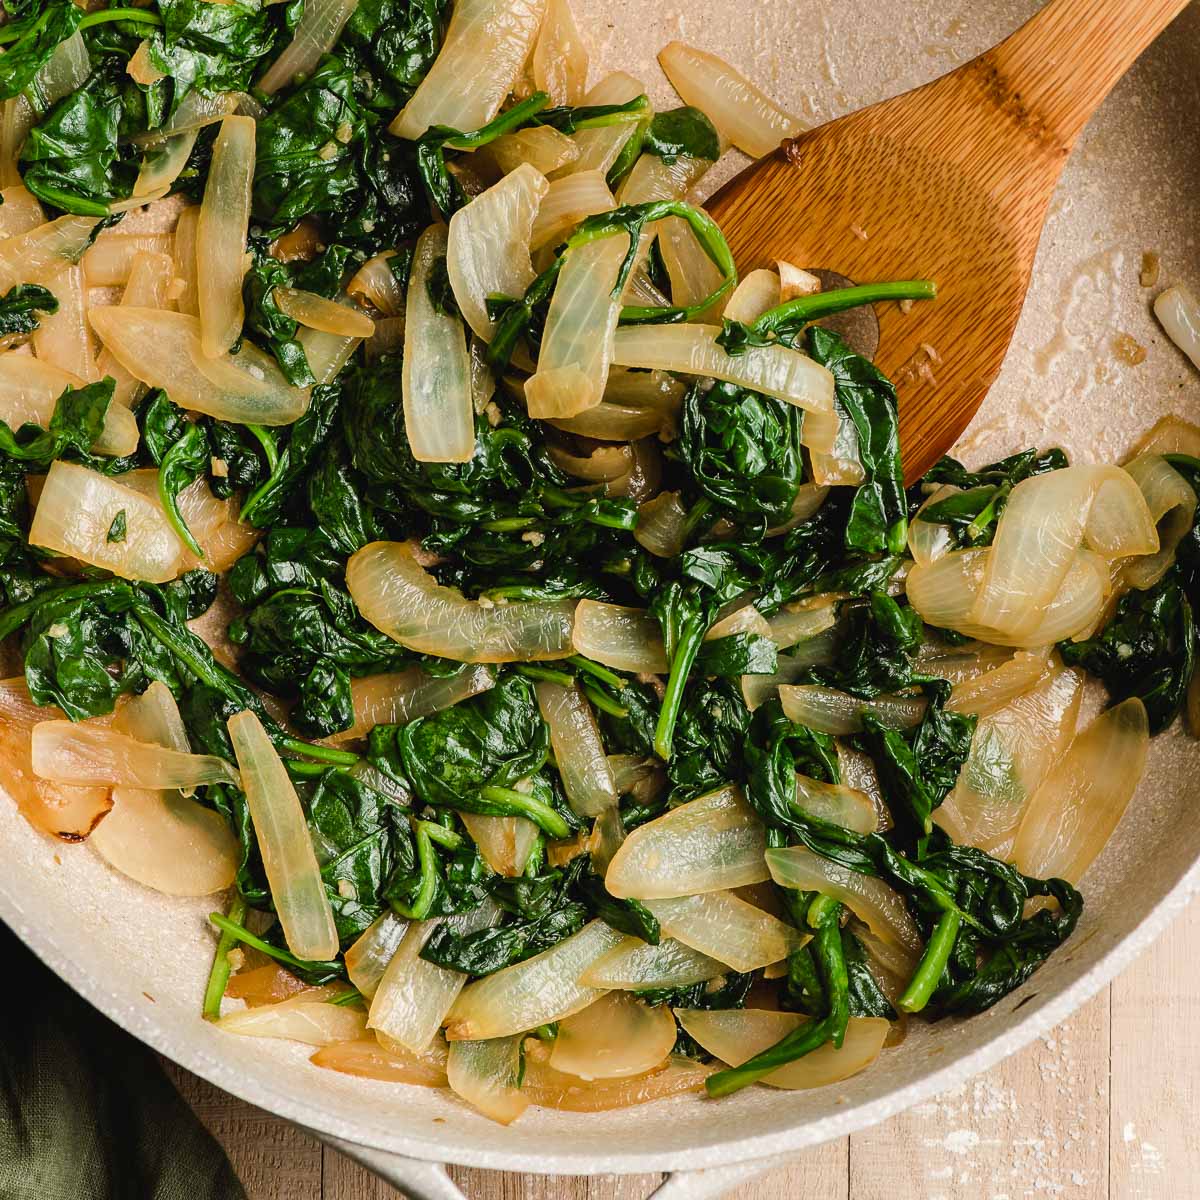 Sauteed spinach and onions in a skillet with a wooden spoon.